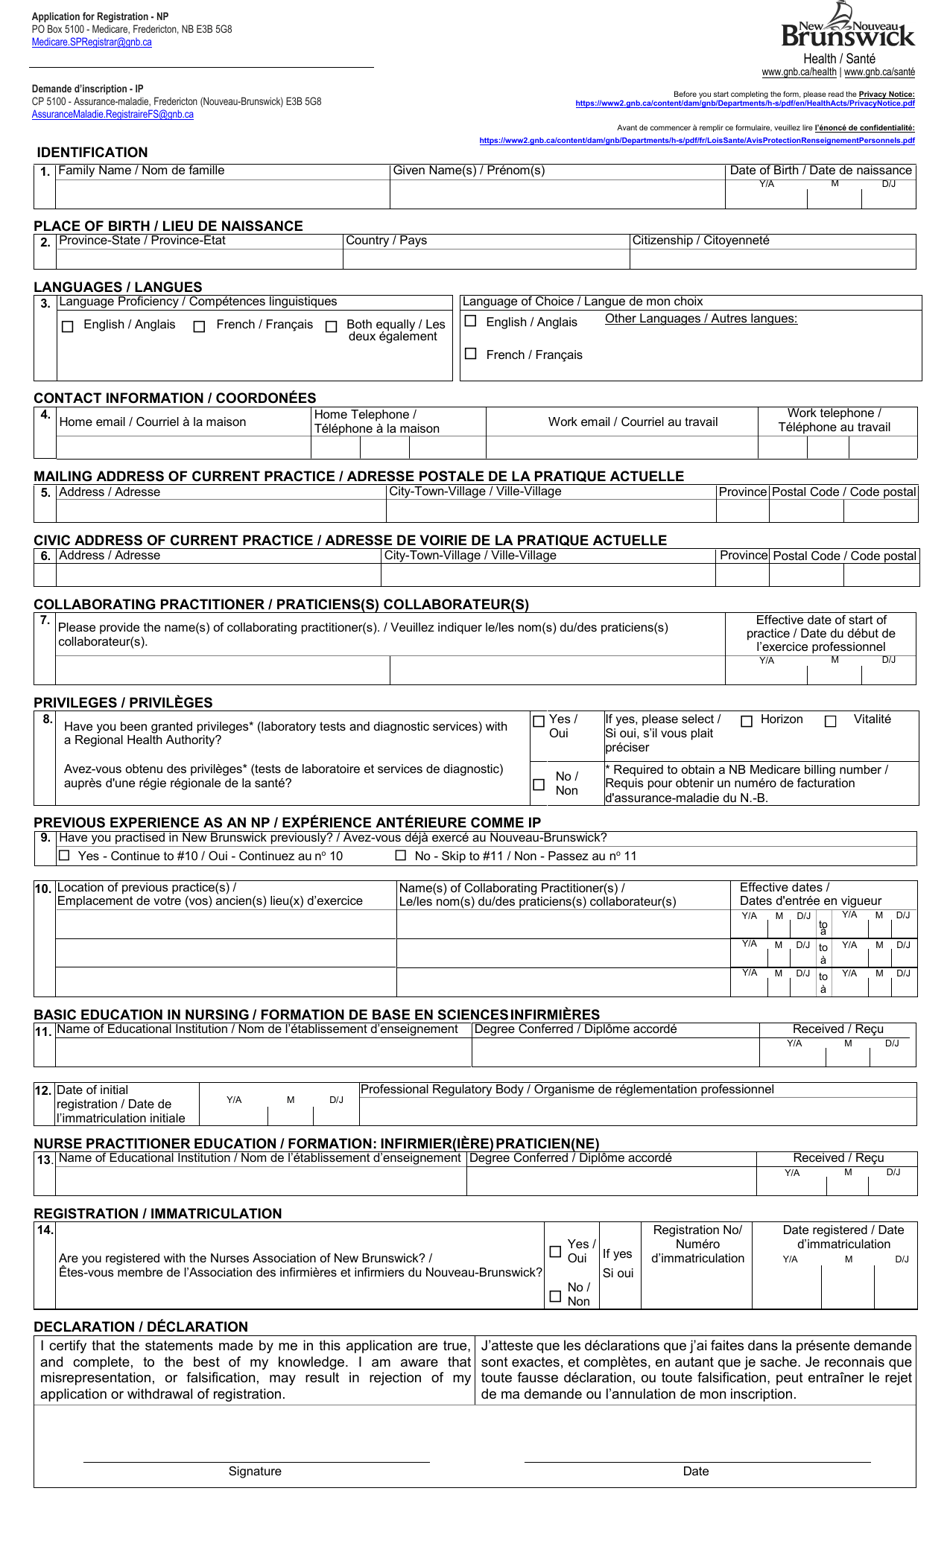 Application for Registration - Np - New Brunswick, Canada (English / French), Page 1